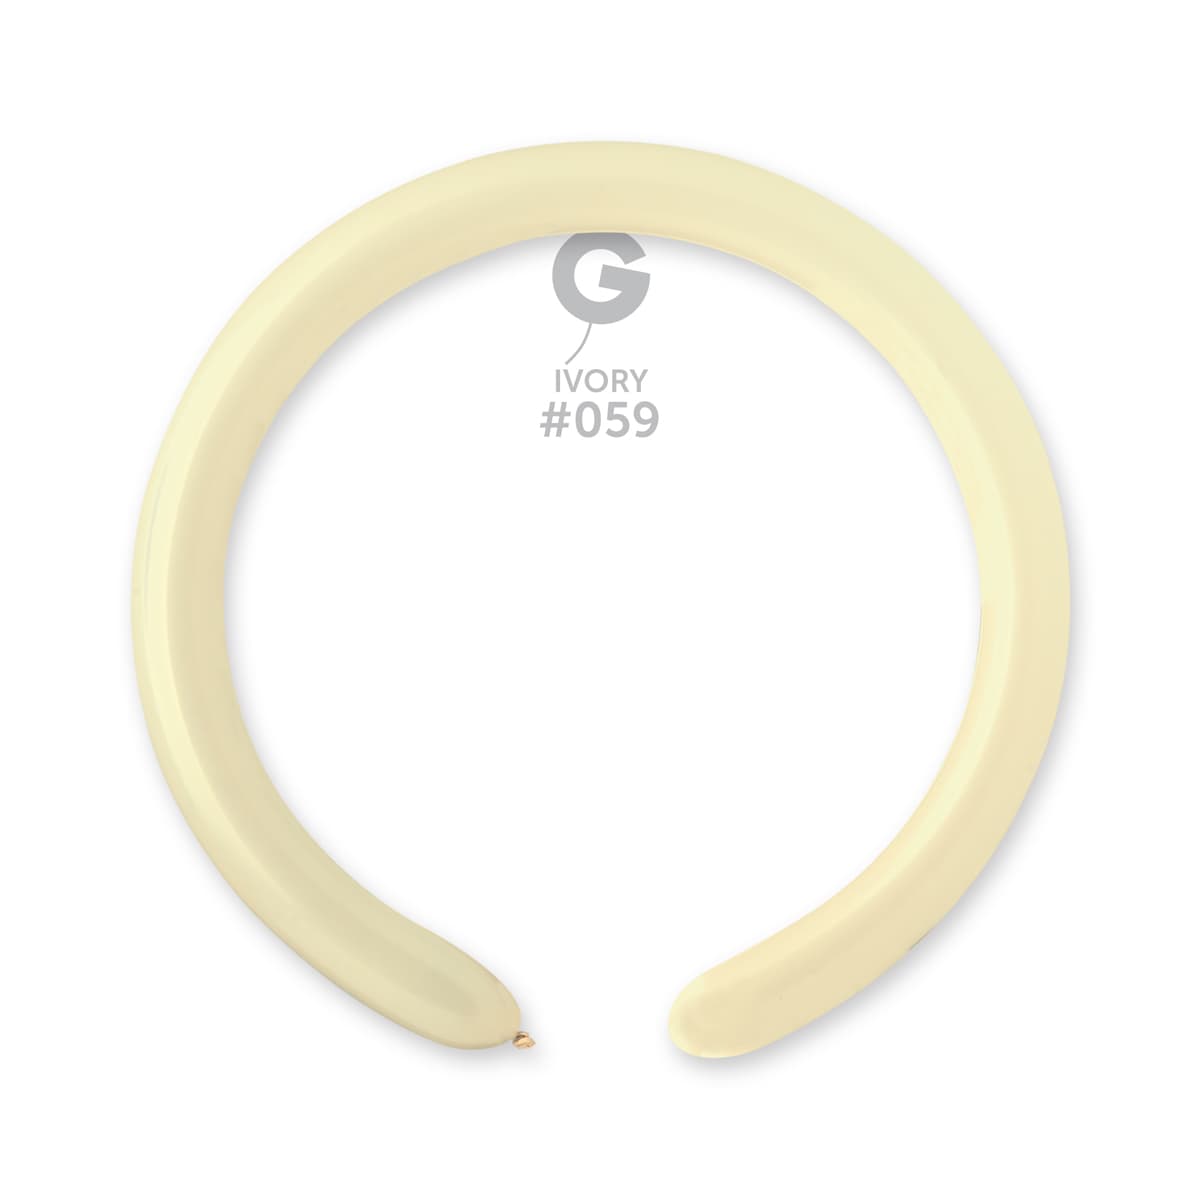 SOLID BALLOONS IVORY 2" GEMAR #059 260